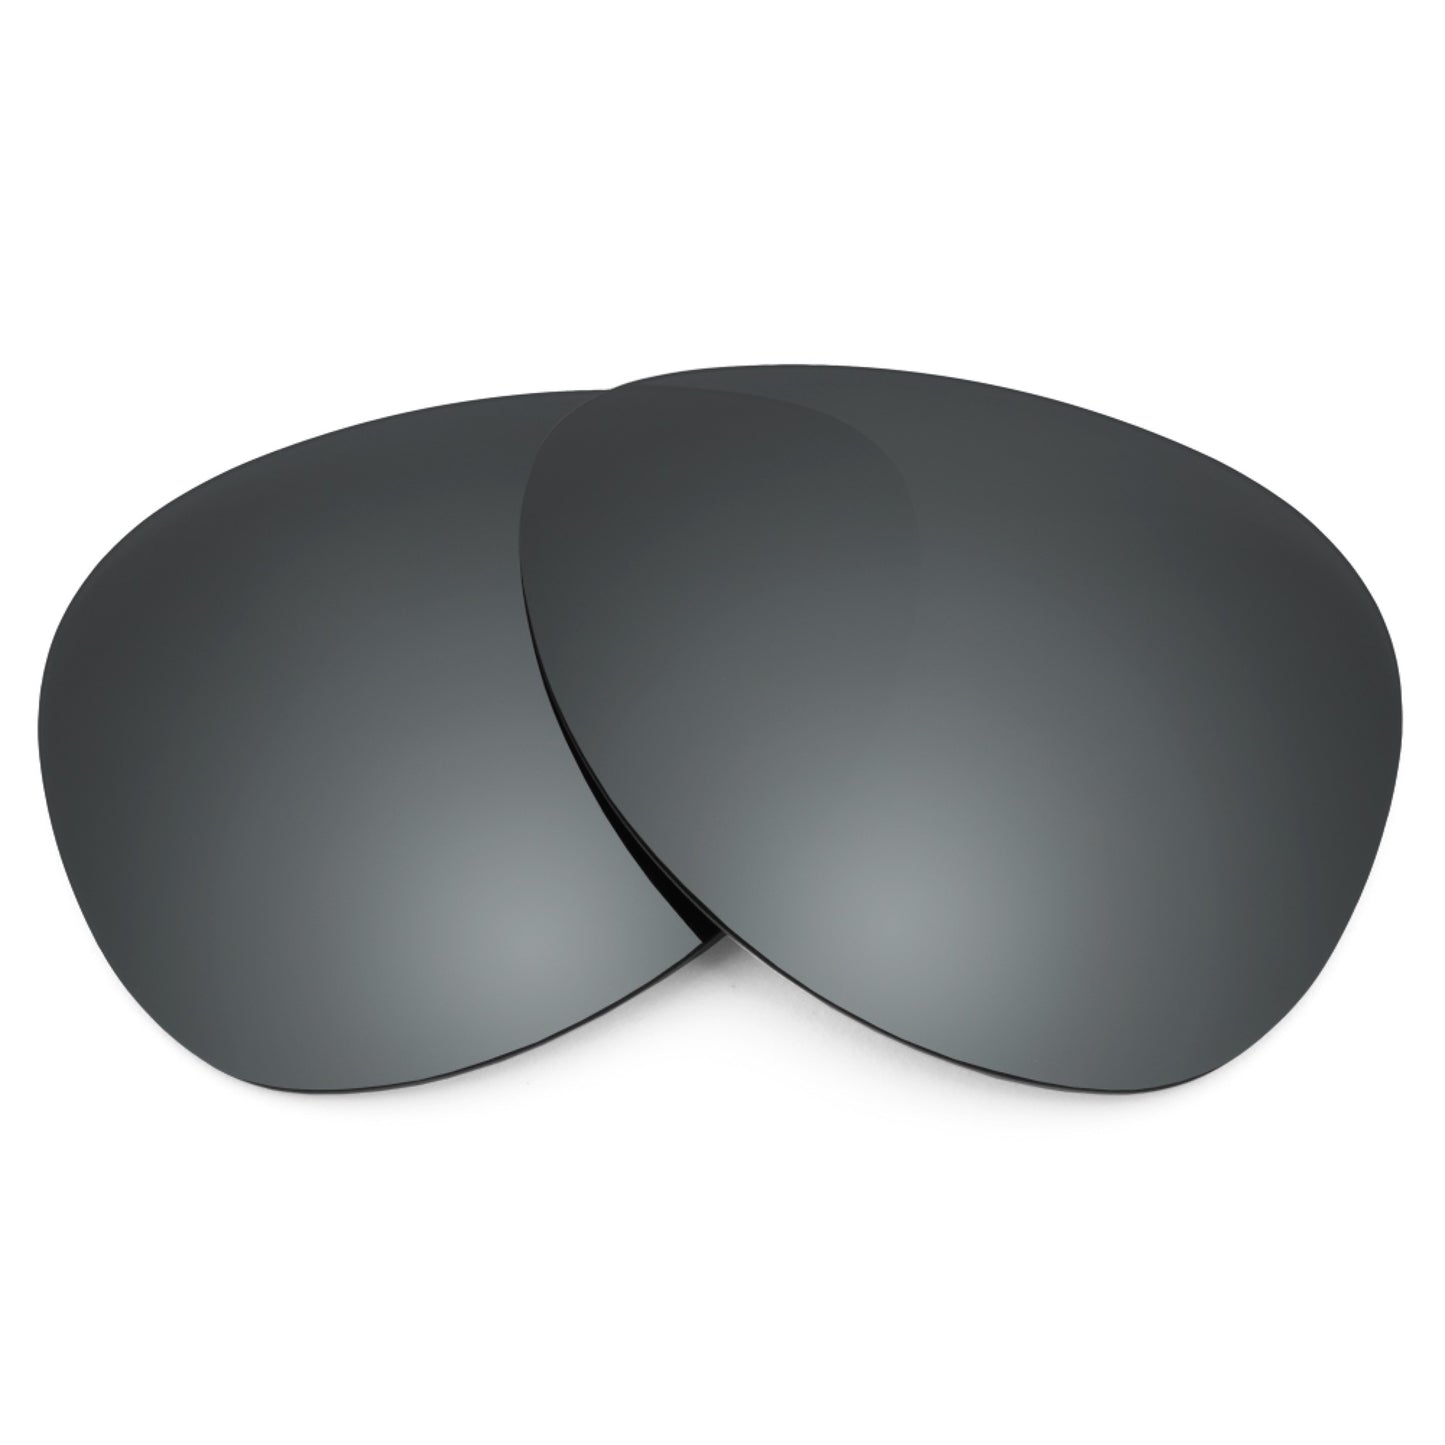 Revant replacement lenses for Ray-Ban New Aviator RB3625 58mm Non-Polarized Black Chrome